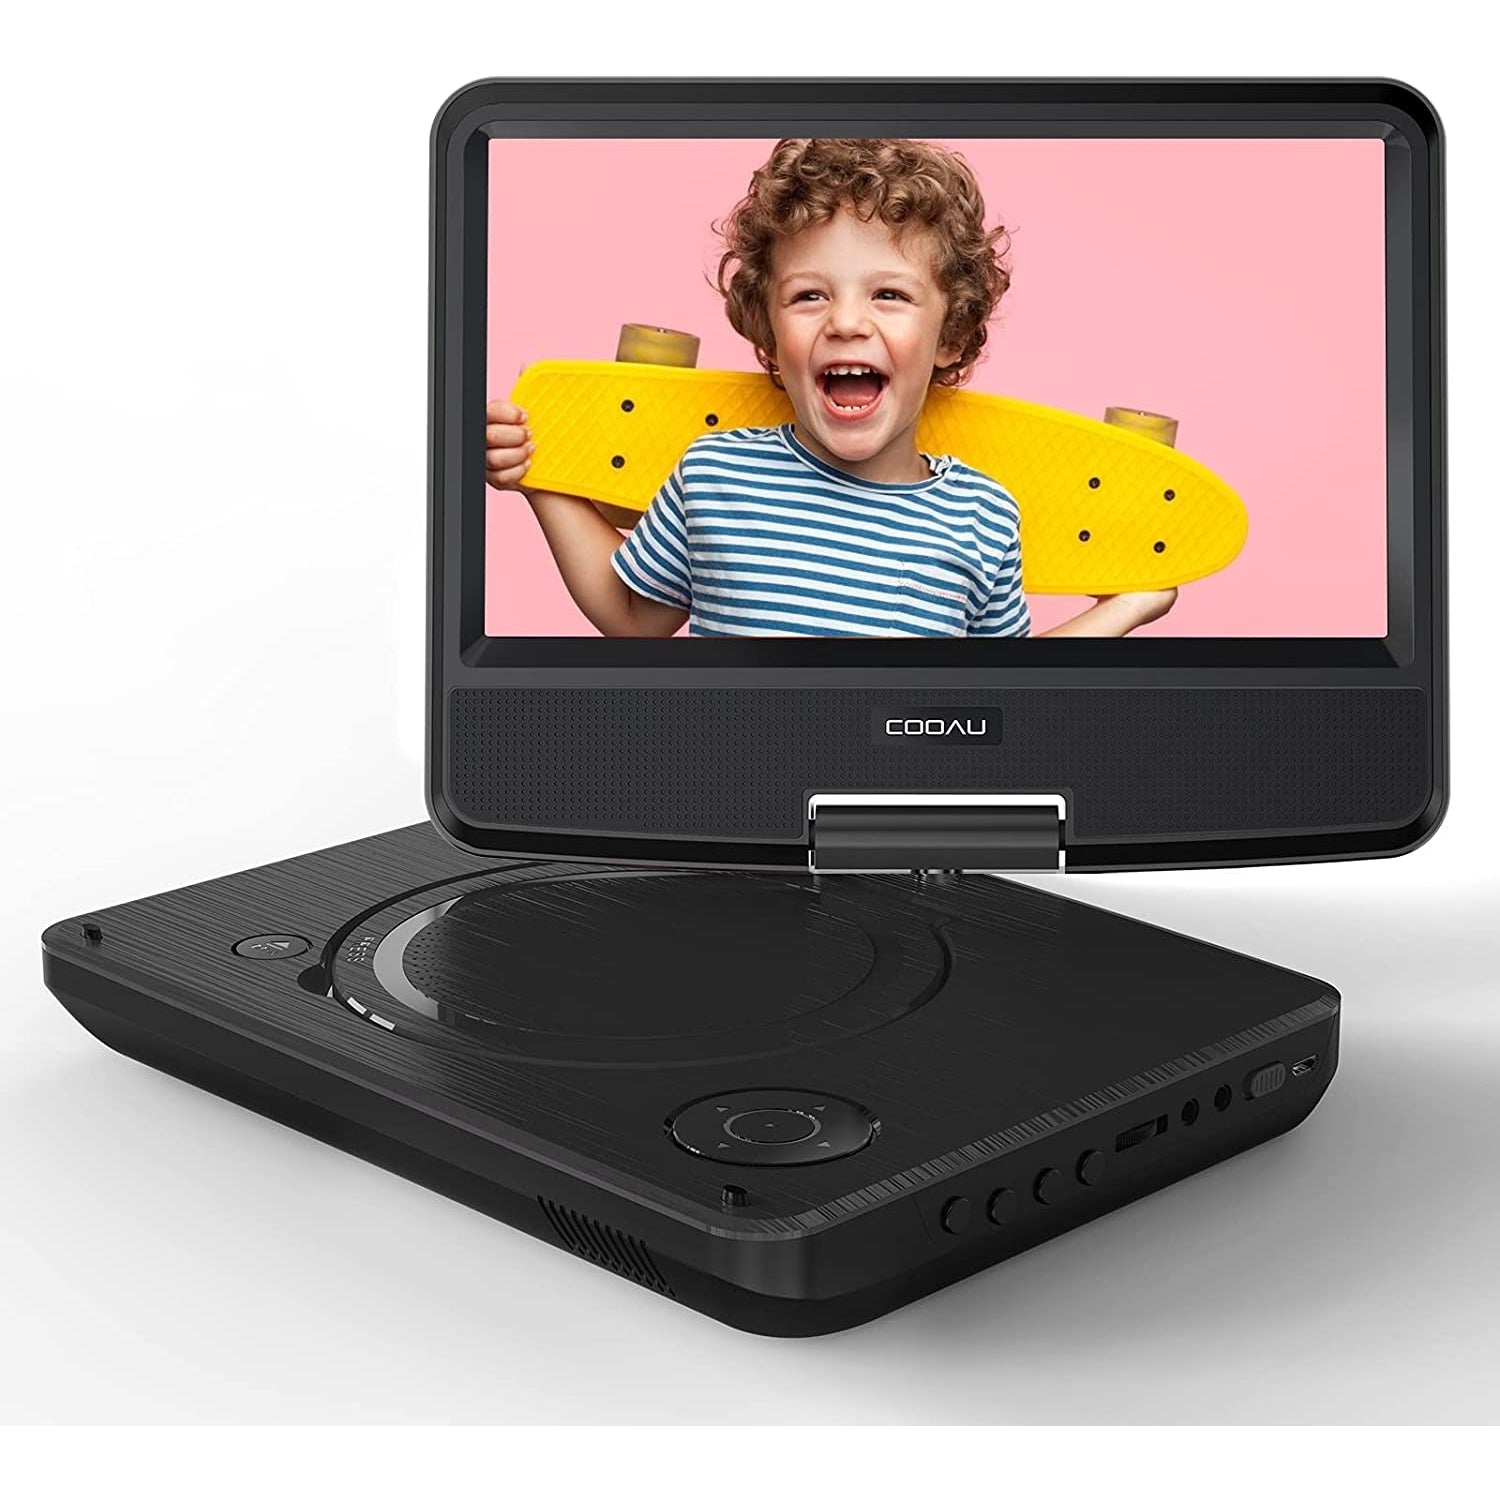 Cooau 11.5'' Portable DVD Player with 9.5'' HD Swivel Screen, Support Power Bank Charging & Last Memory Function